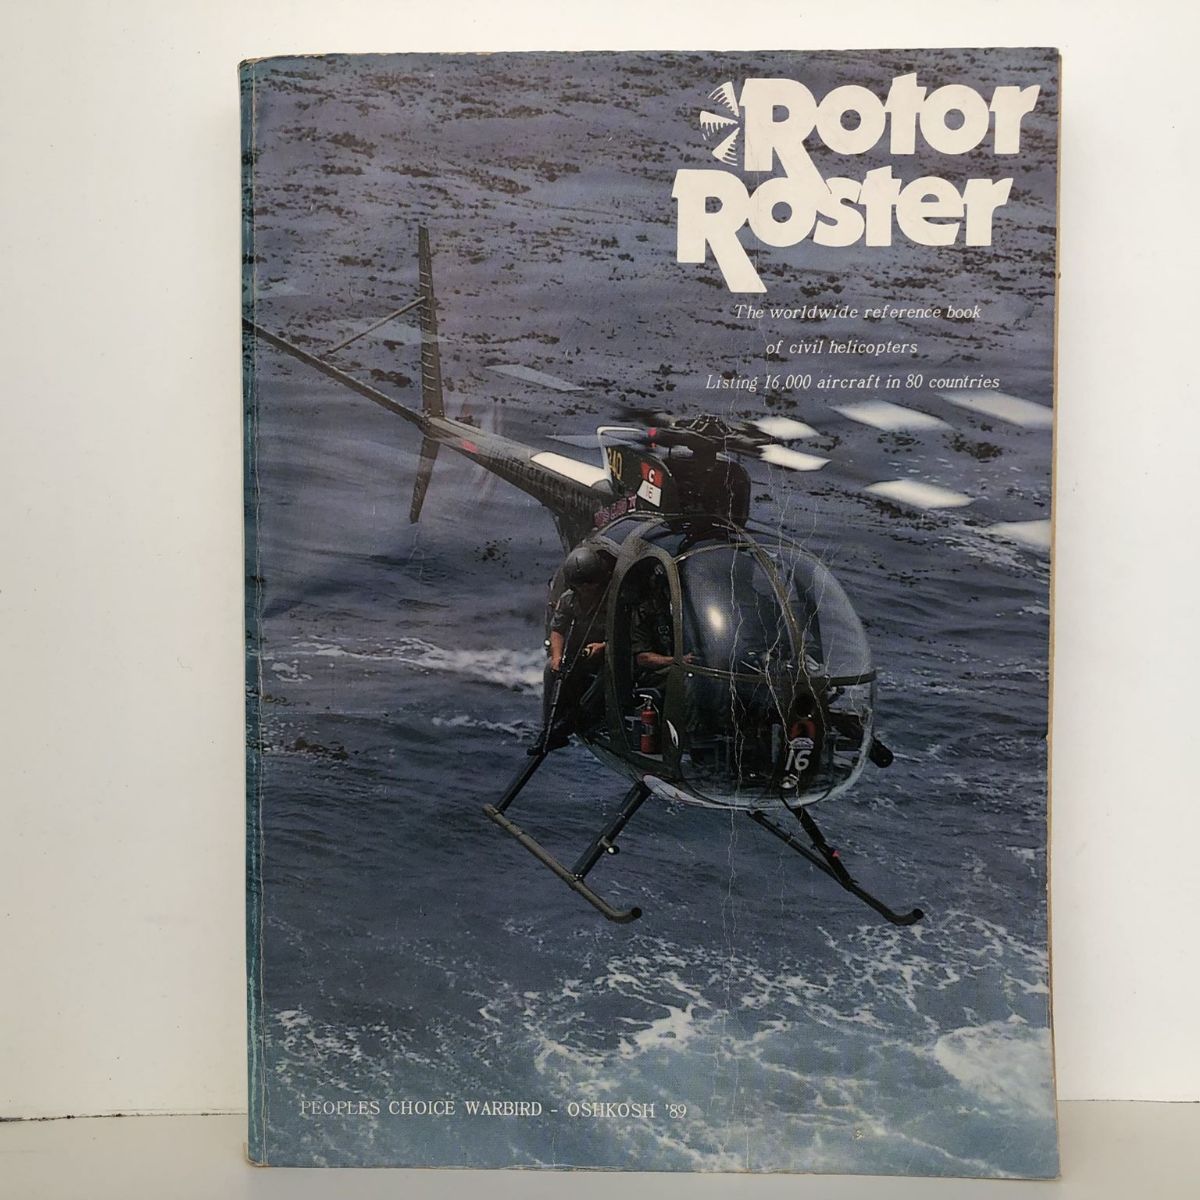 ROTOR ROSTER 1990: The Worldwide Reference Book of Civil Helicopters